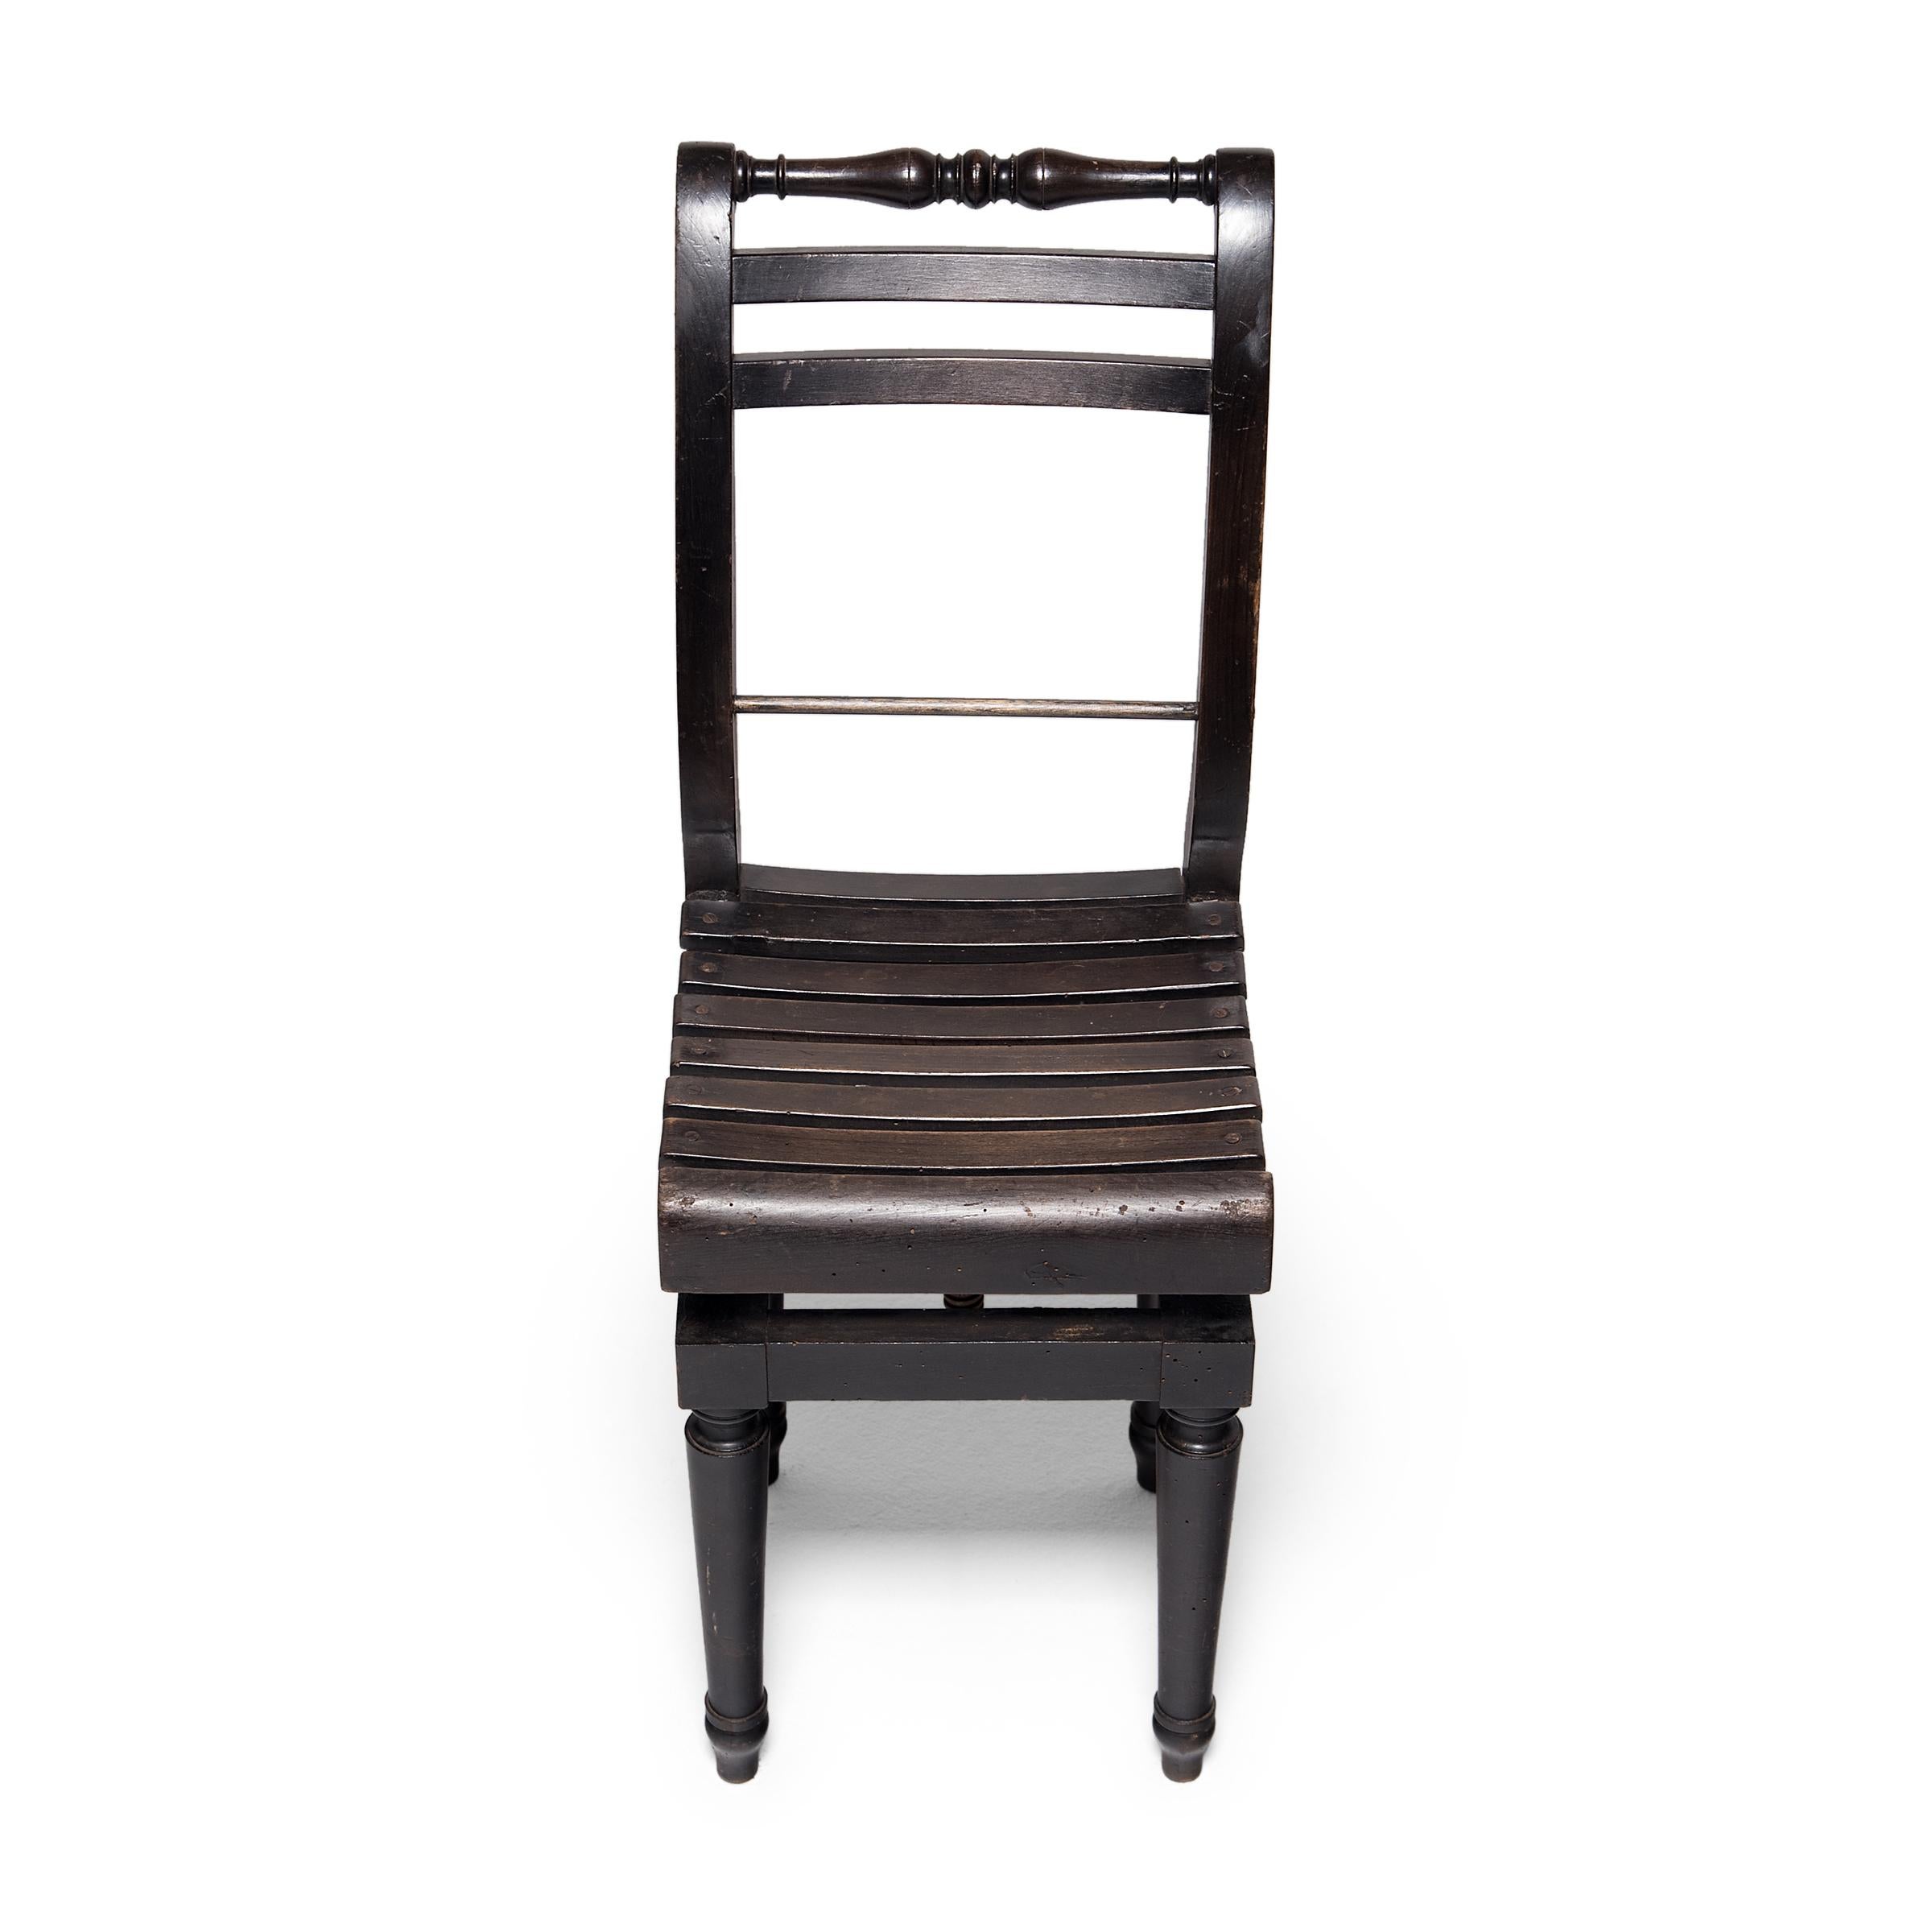 Iron Chinese Slatted Turn Chair, C. 1900 For Sale